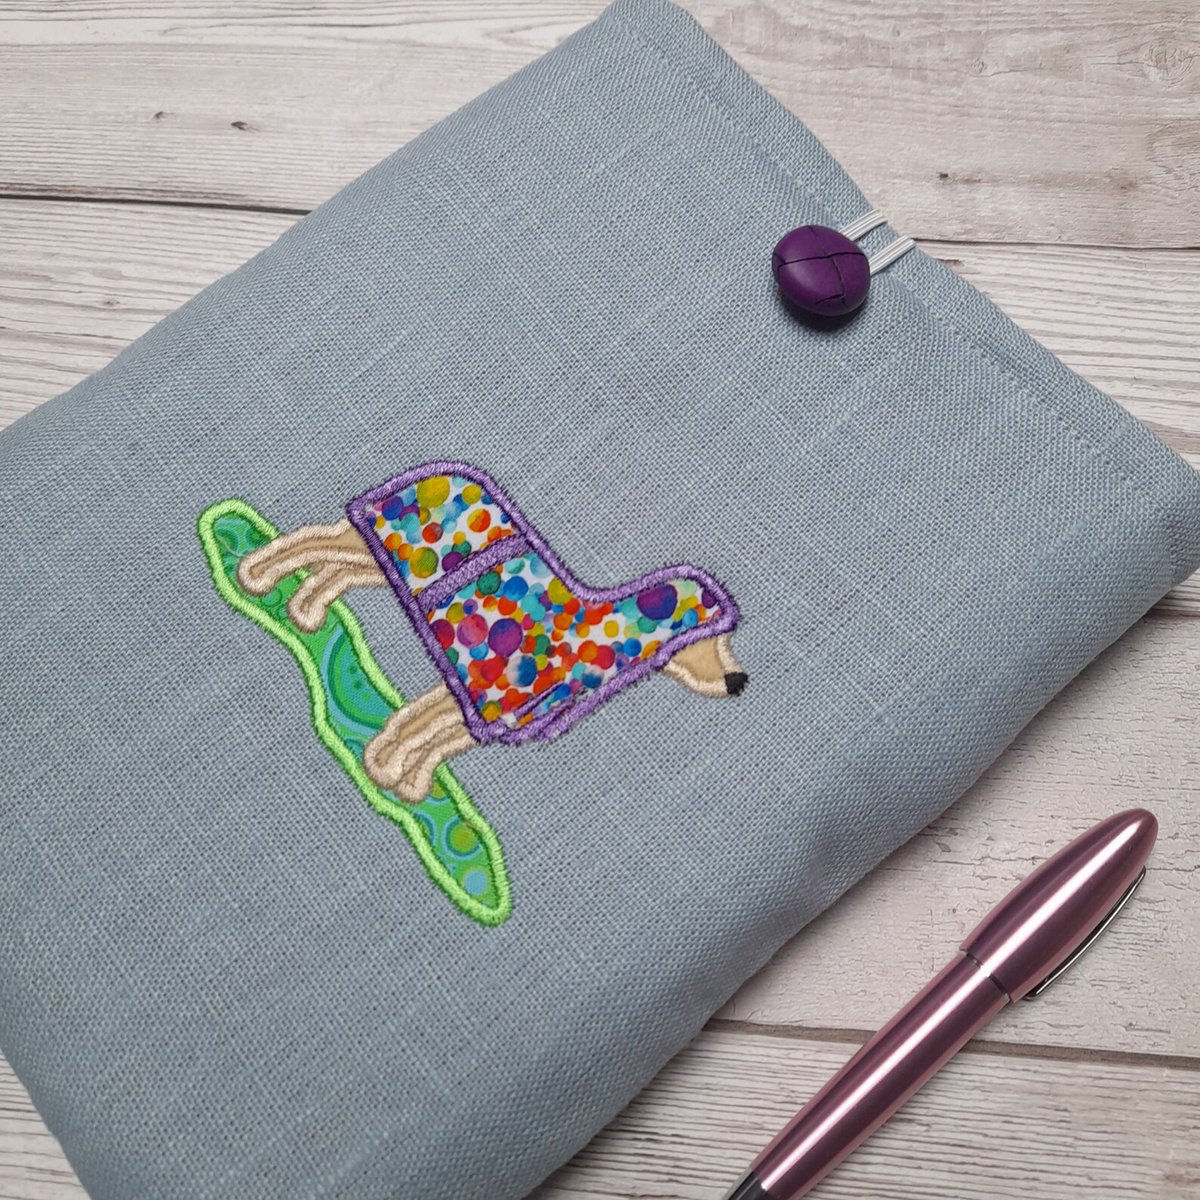 These adorable linen #handmade #book covers make the perfect unique #gift for the #labrador lover in your life Can be #personalised to make them even more special dotty4paws.co.uk/product/schnau… #Earlybiz @MolleCollection